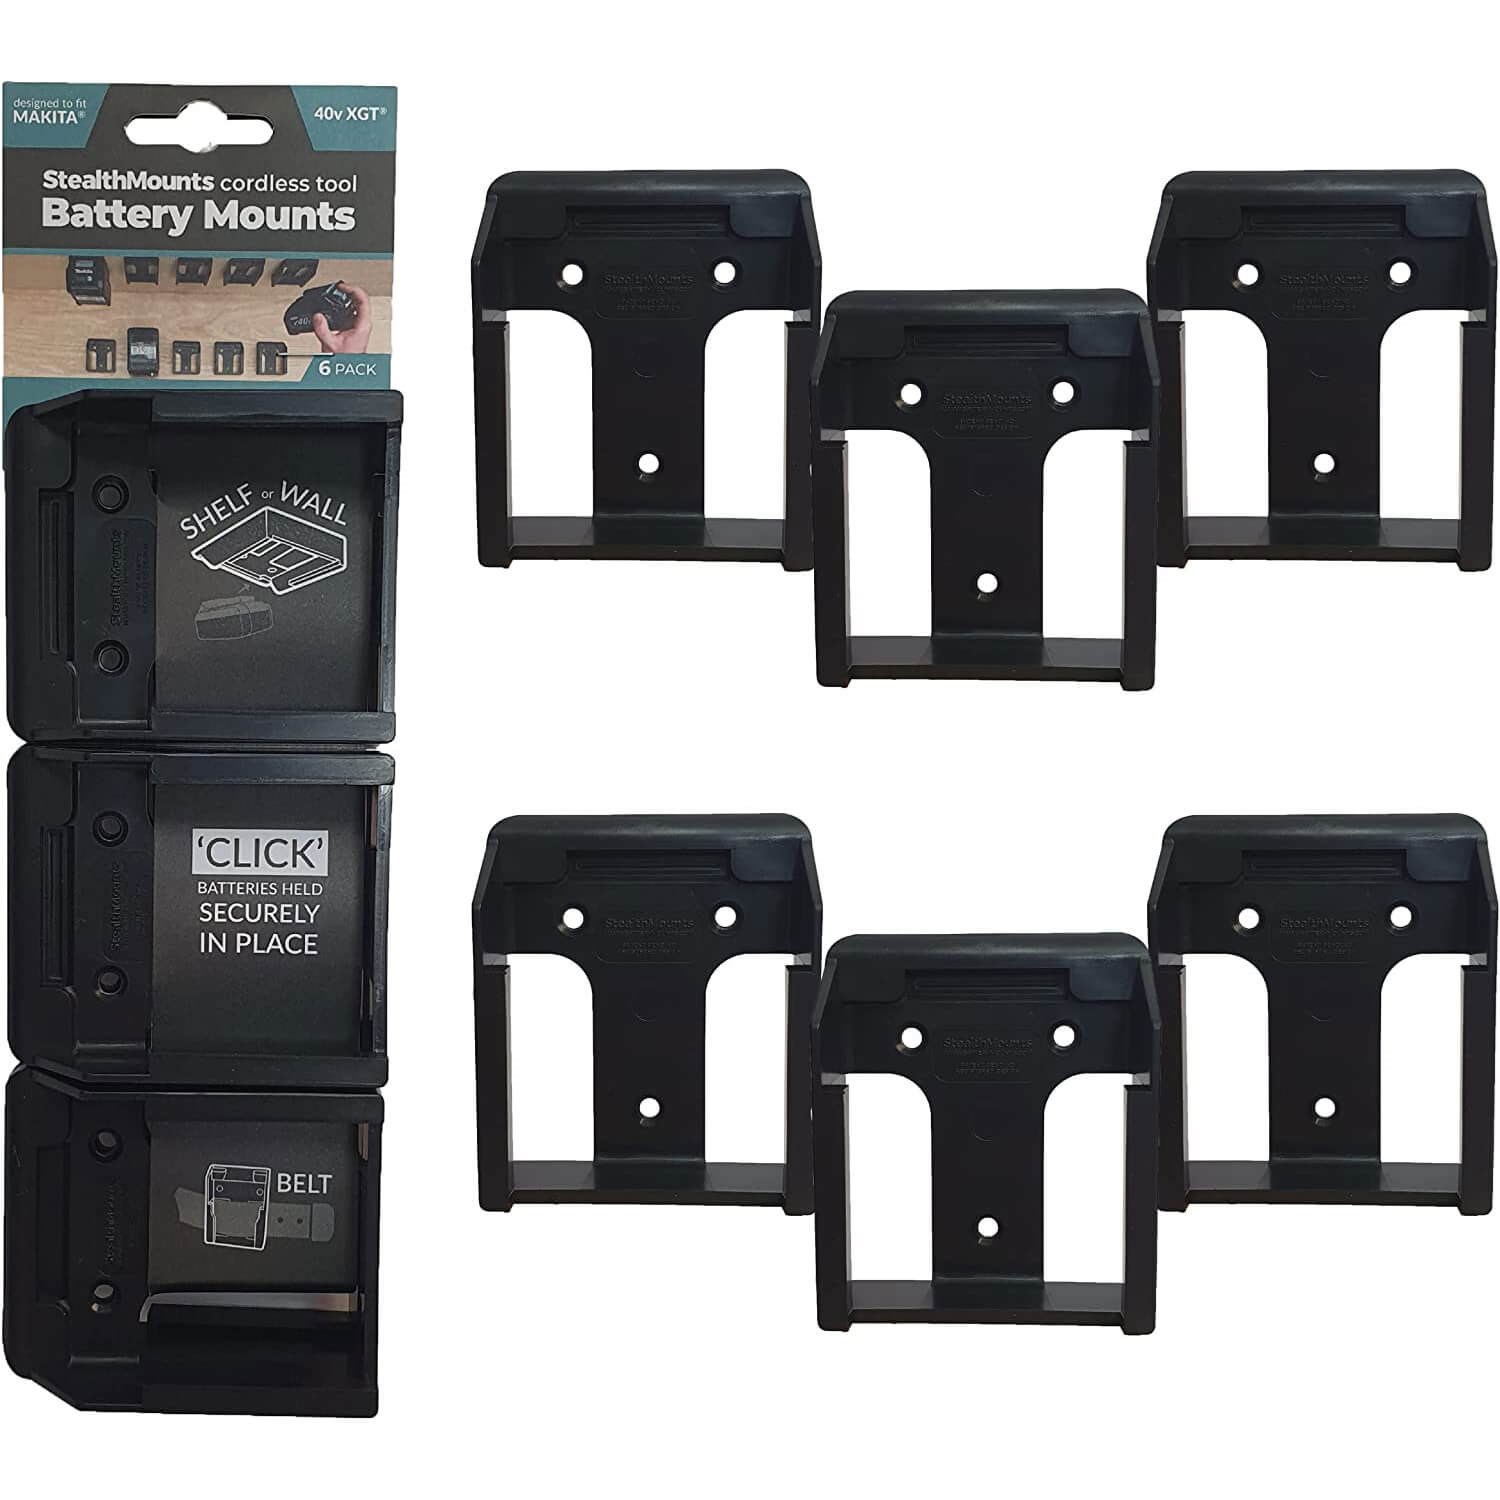 Battery mounts StealthMounts Makita 40v XGT 6-pack - distribution wholesale  and retail. - Bitmag official store